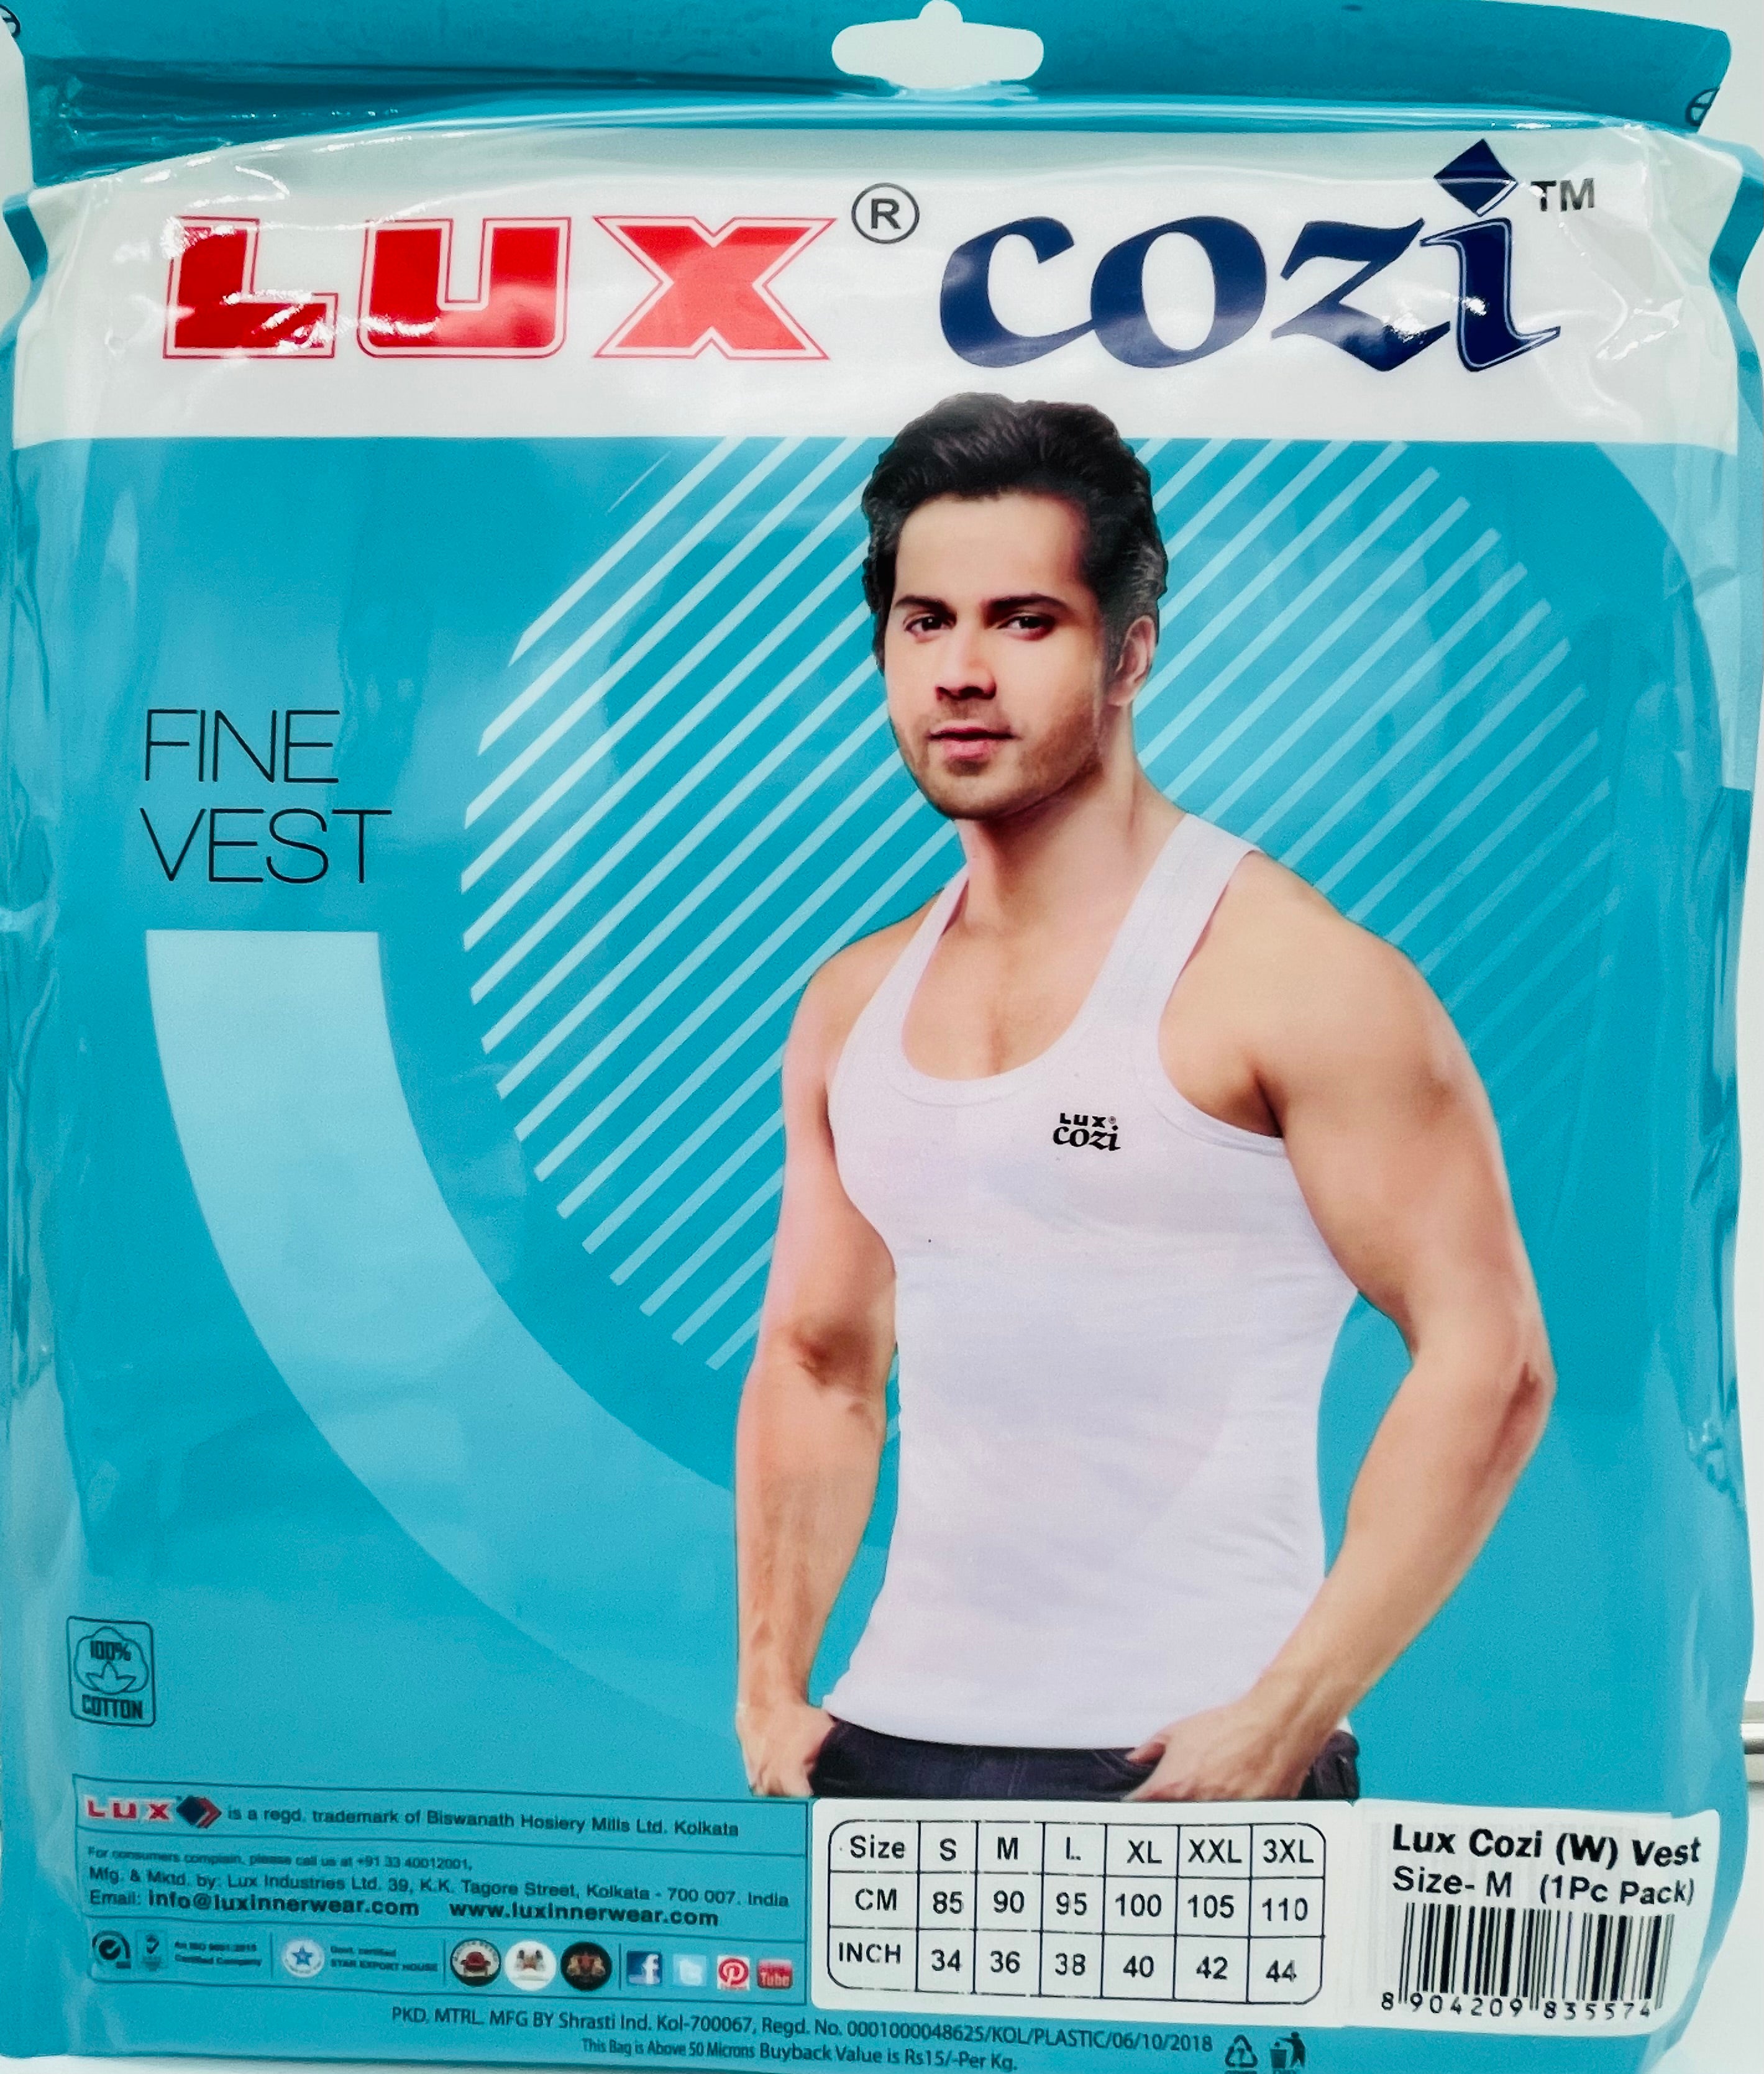 Shoppers boys - Combo pack200 rs only lux Venus underwear and lux  Cozi..Xylo gym vest